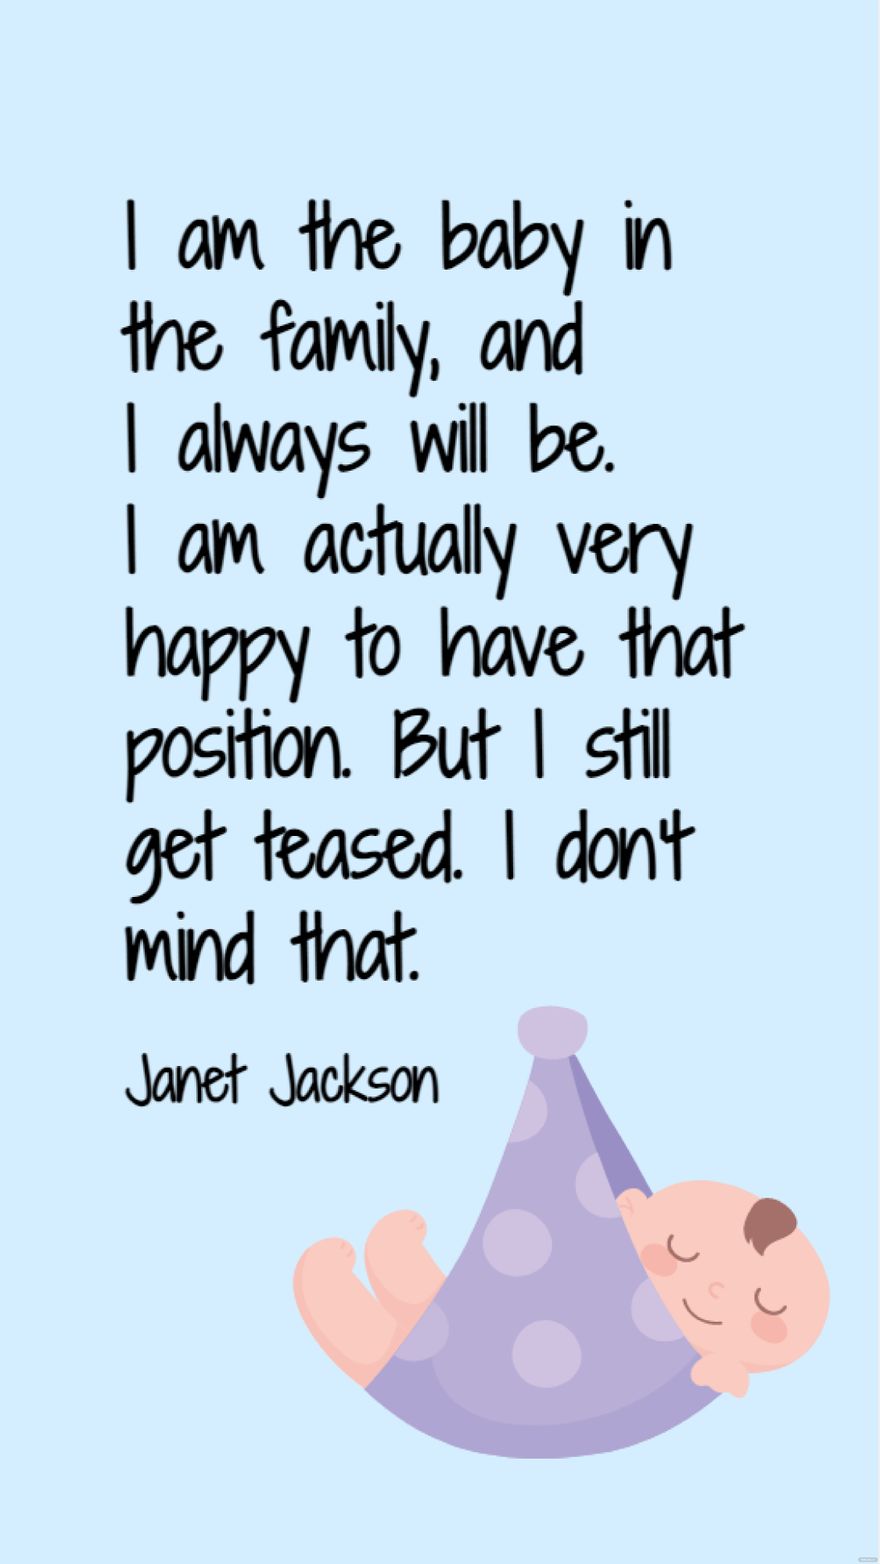 Janet Jackson - I am the baby in the family, and I always will be. I am actually very happy to have that position. But I still get teased. I don't mind that.